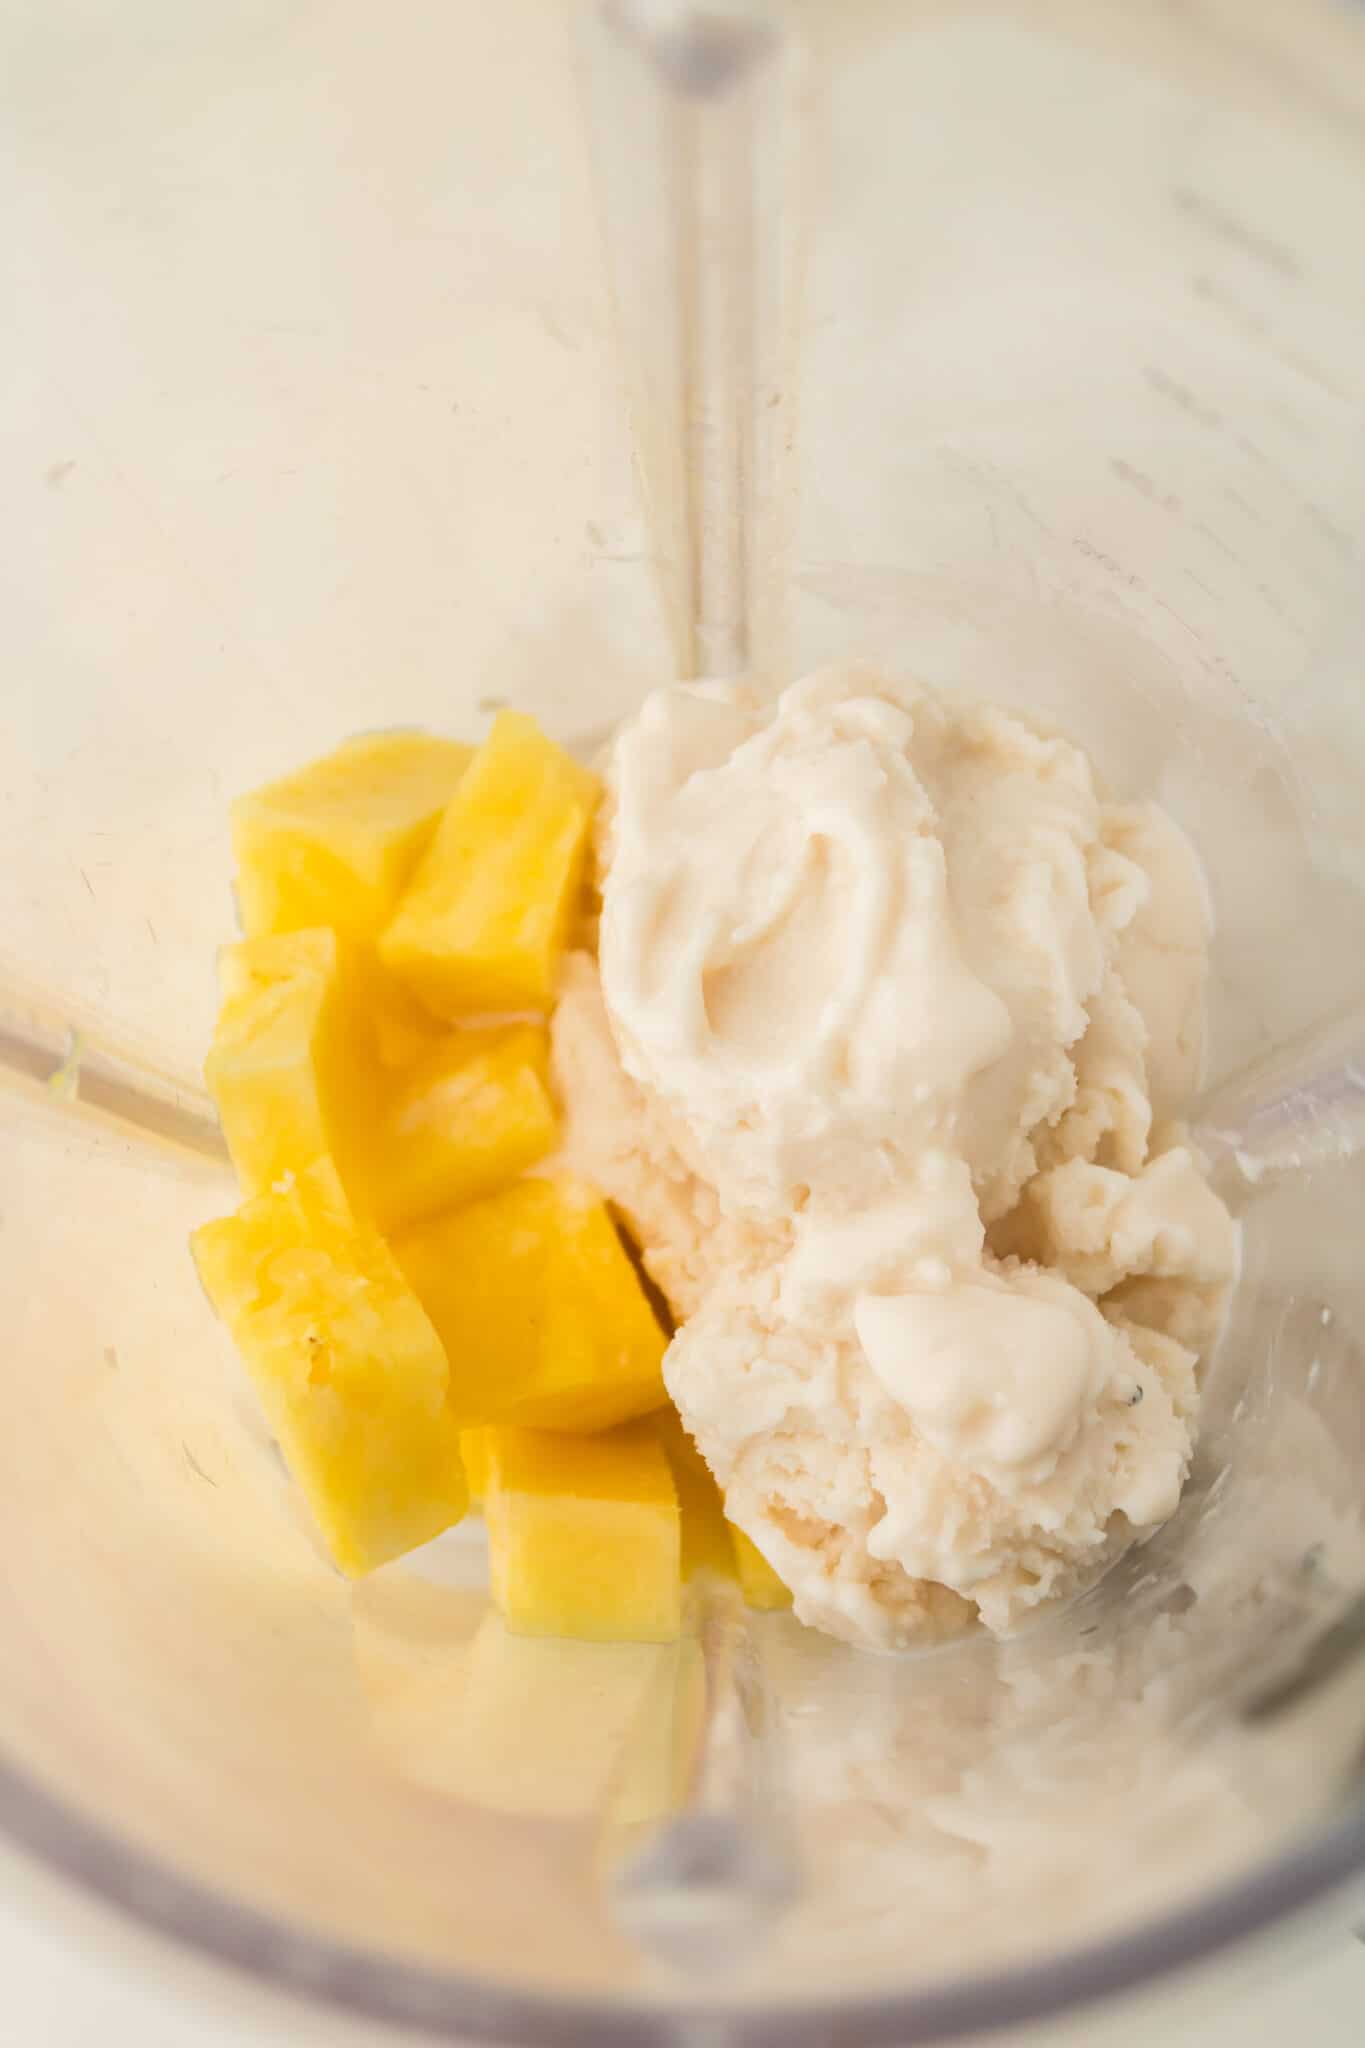 Adding the pineapple and ice cream into the blender.